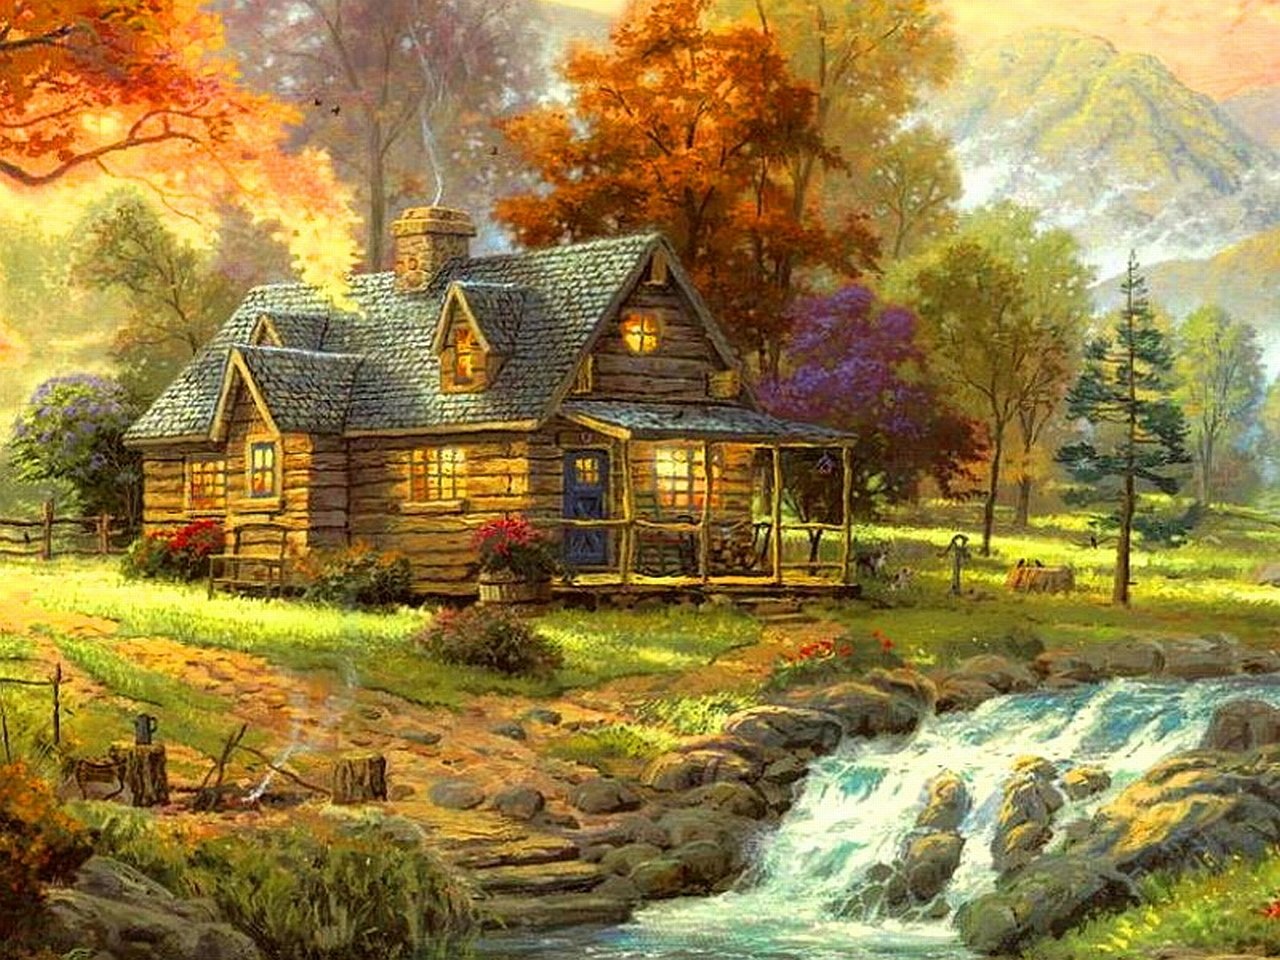 Cabin in the Countryside Painting Image - ID: 340003 - Image Abyss